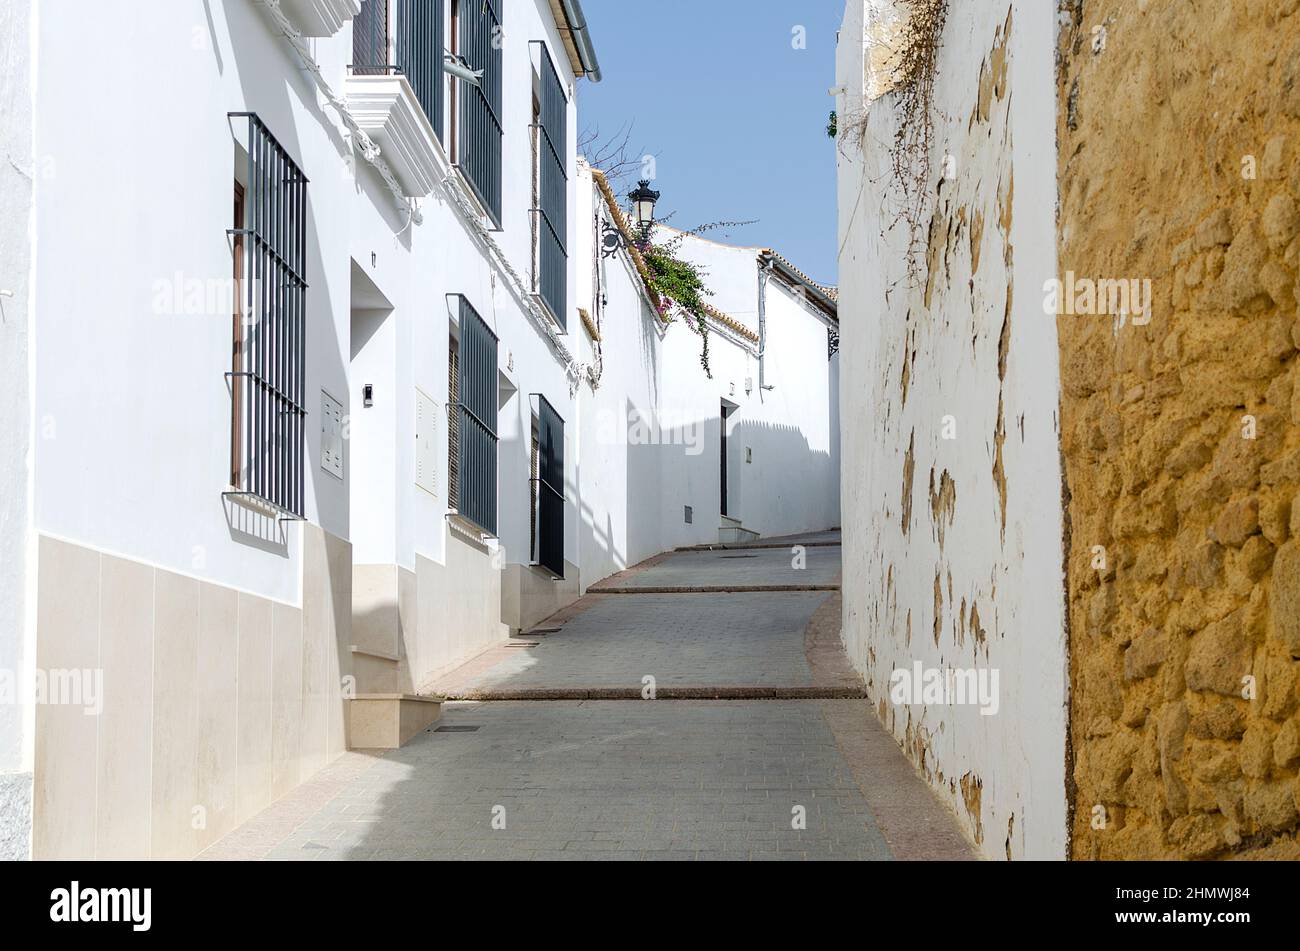 Typical street in the village of Osuna, Seville, Spain Stock Photo